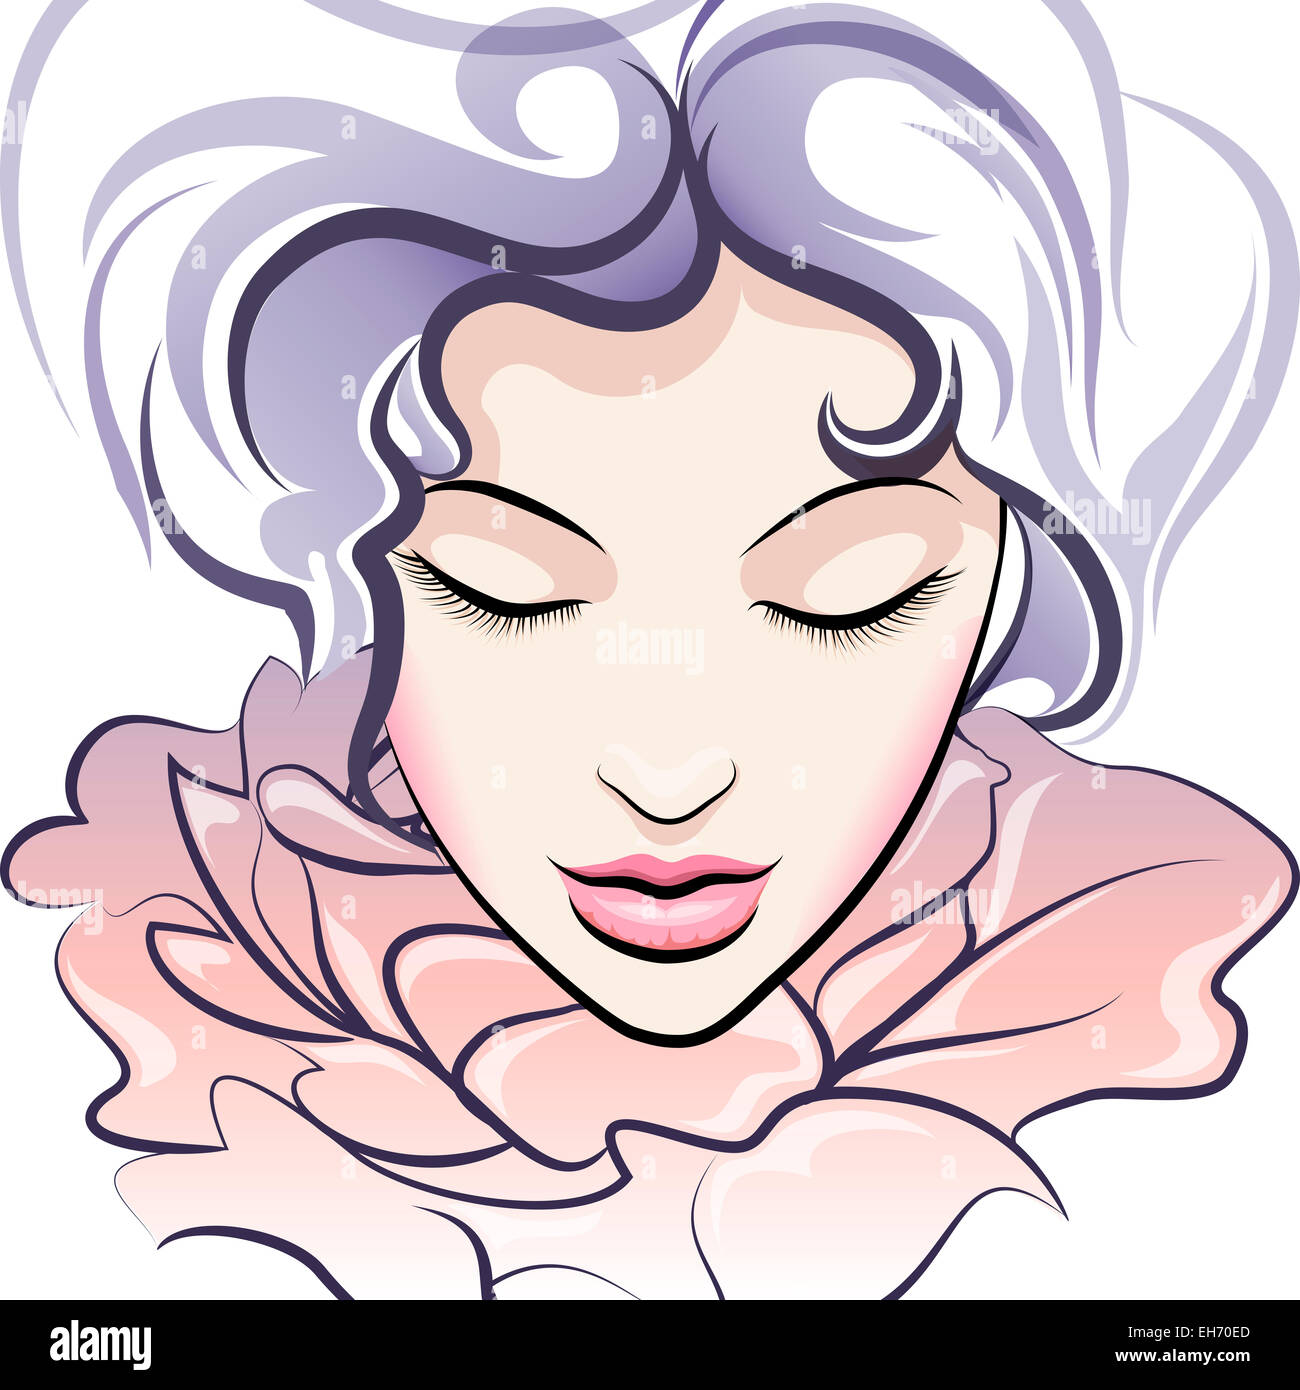 Illustration with young woman face and rose flower drawn in poster style. Stock Photo